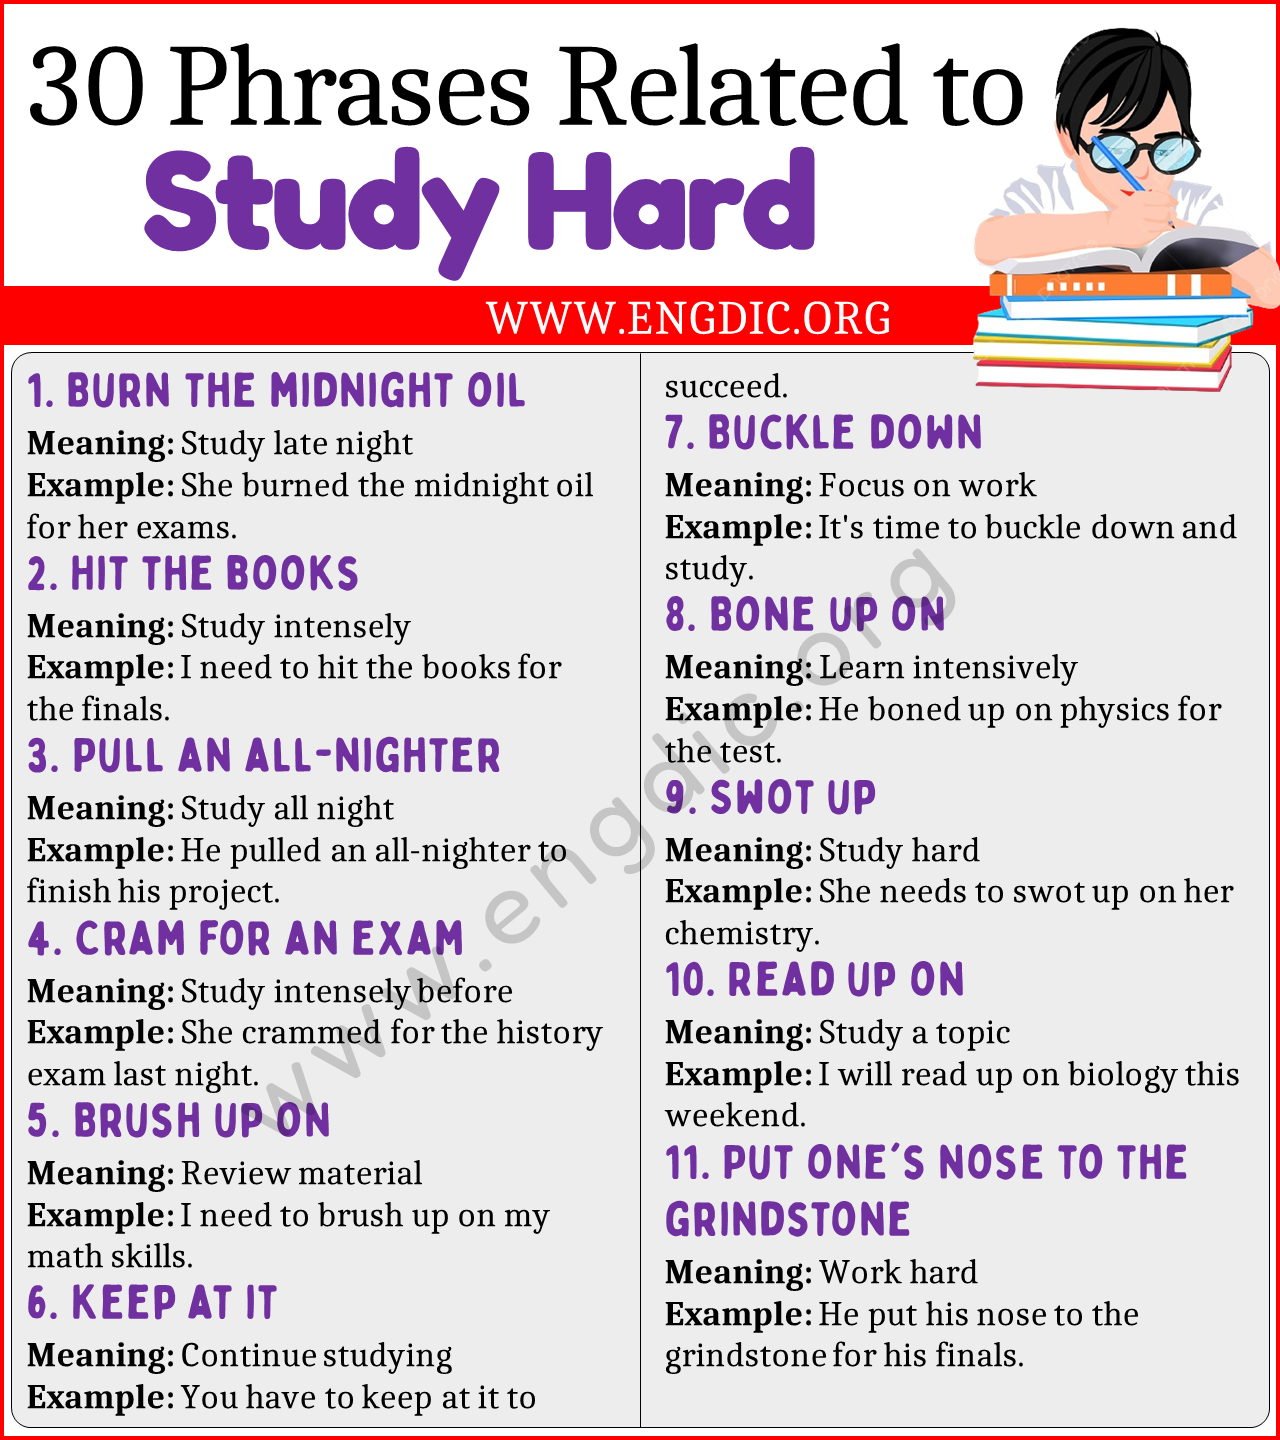 Phrases Related to Study Hard